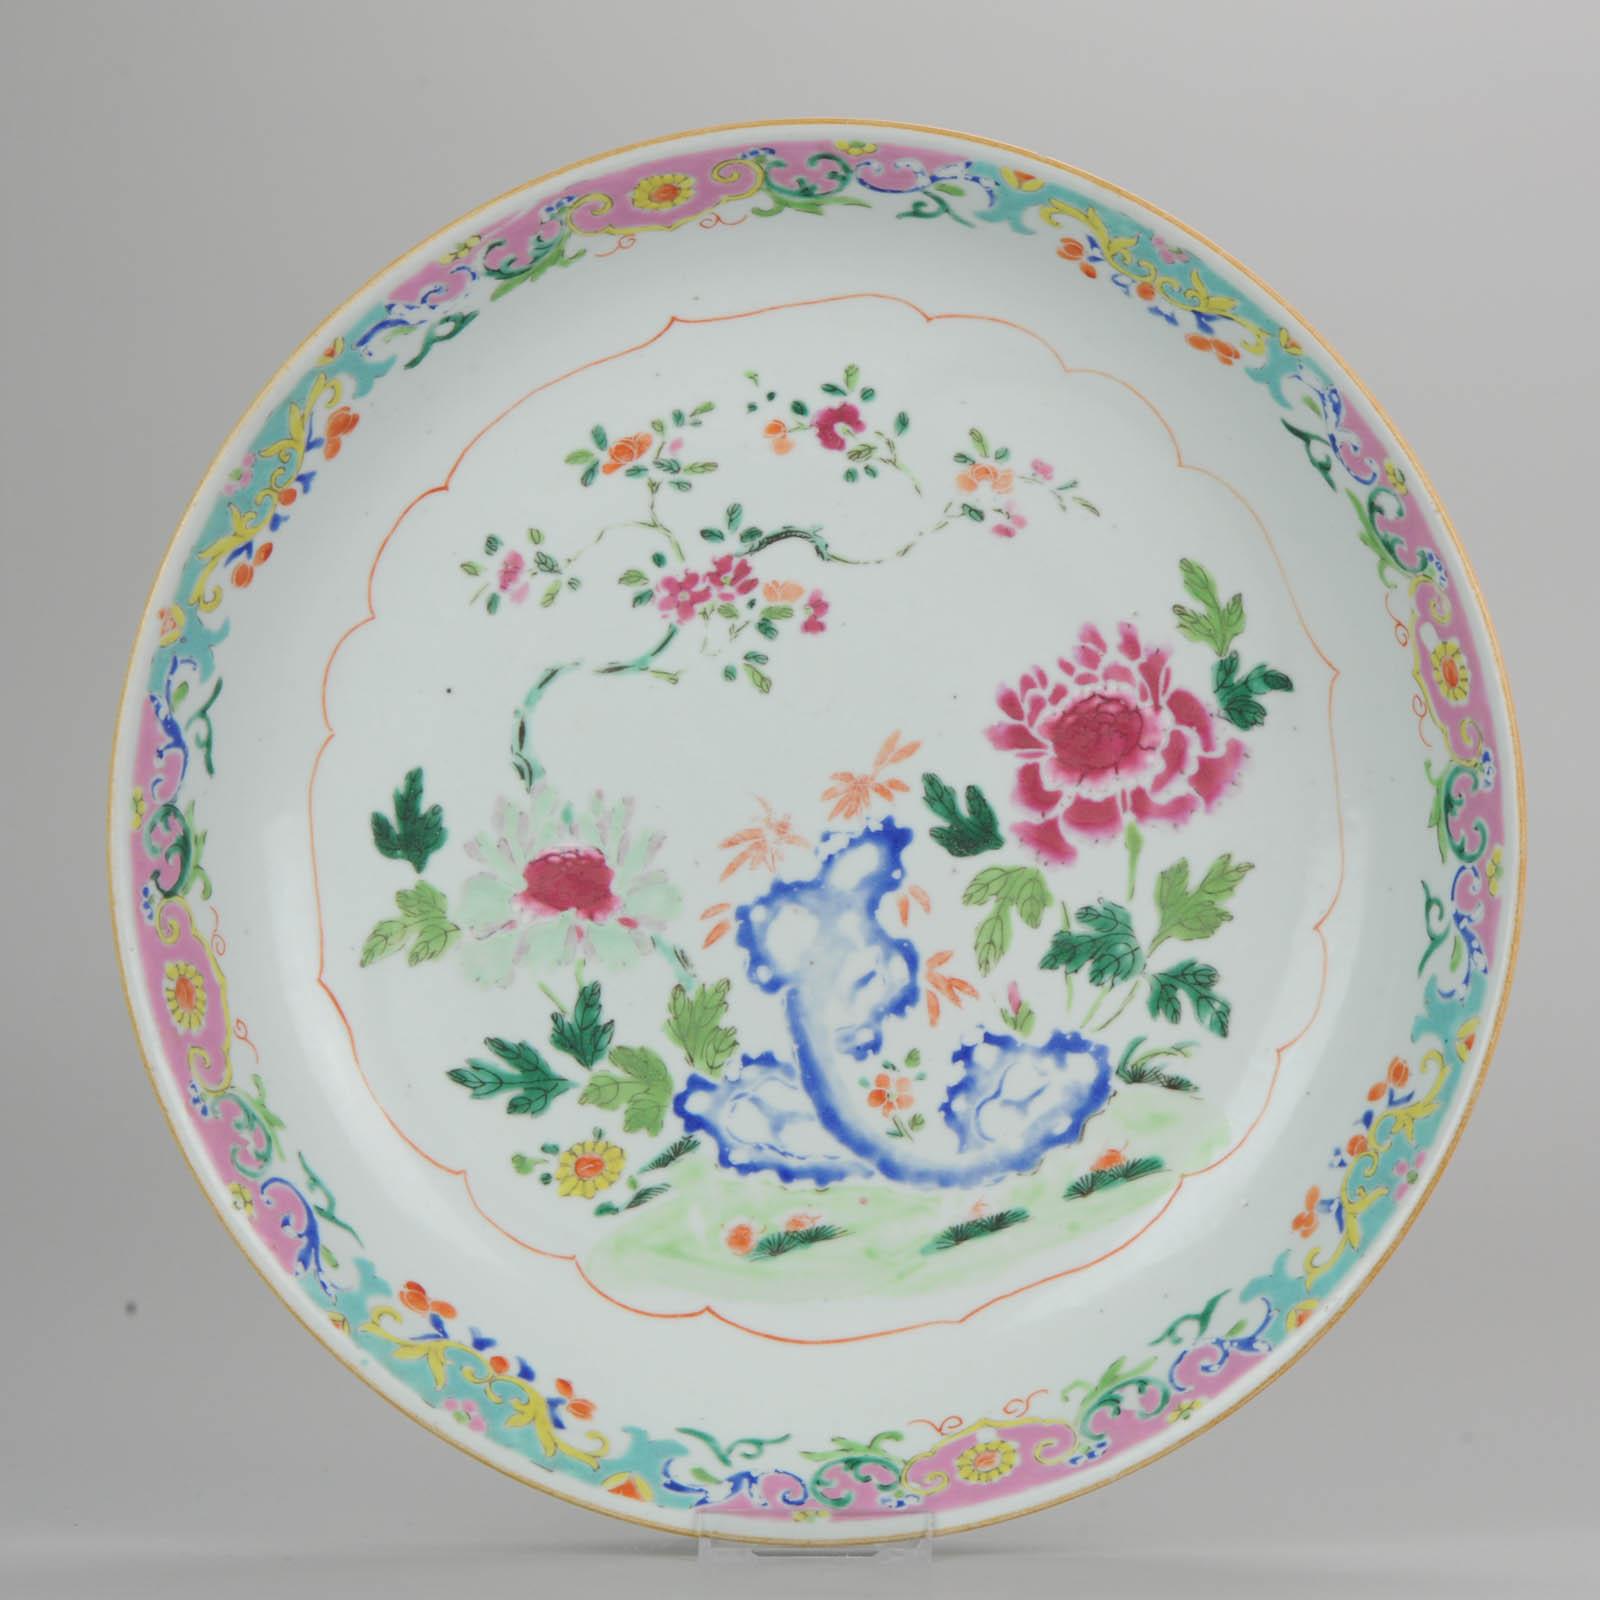 Lovely Chinese Porcelain pre Bencharong / Pre Nyonya plate/charger. We call this style Pre Bencharong because it has many features of later bencharong / south east Asian wares, but it is older. Often these plates are dated to qianlong period 18th